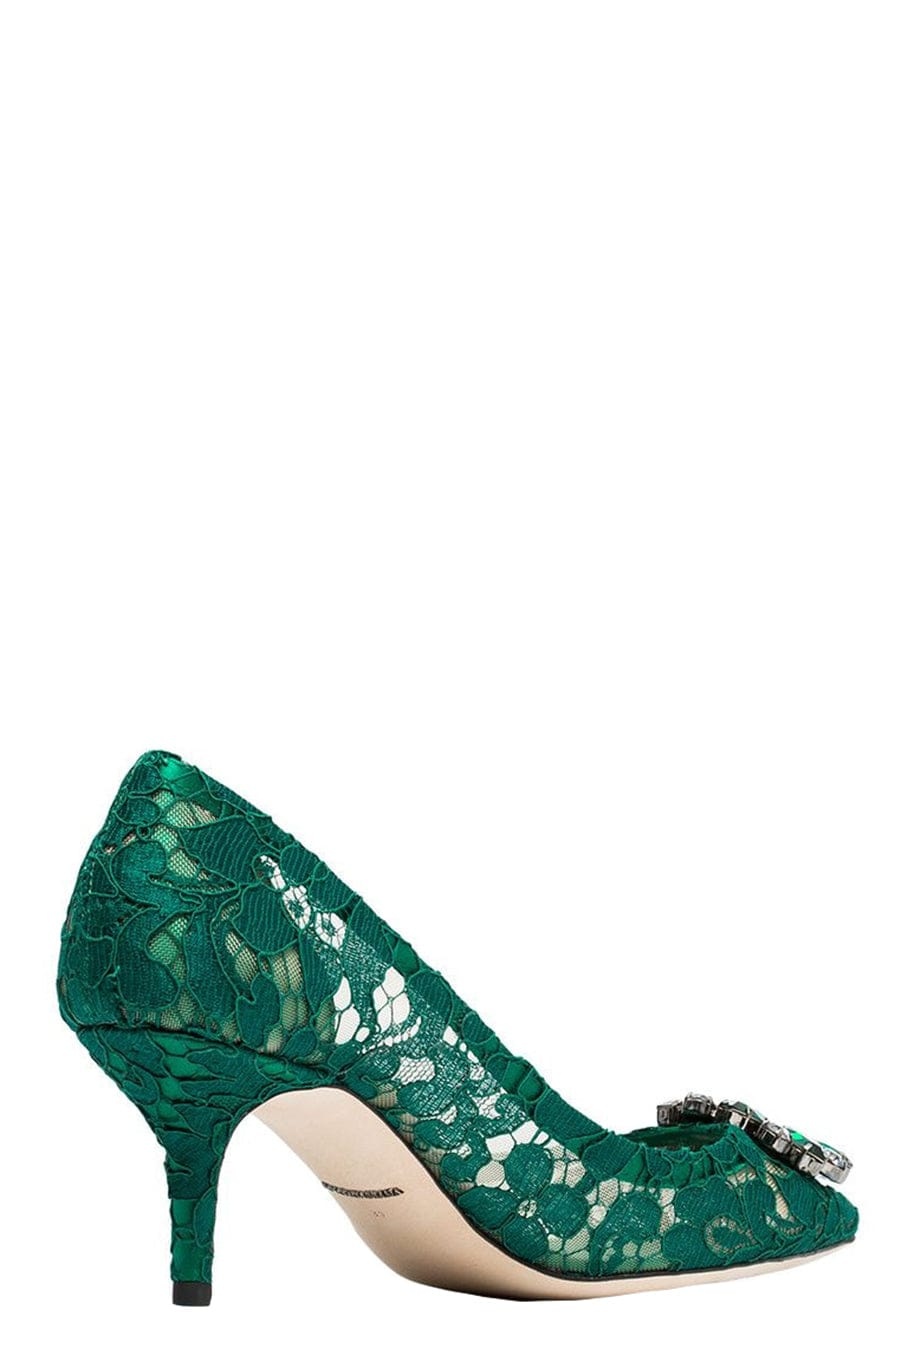 Lace Heel with Brooch - 5